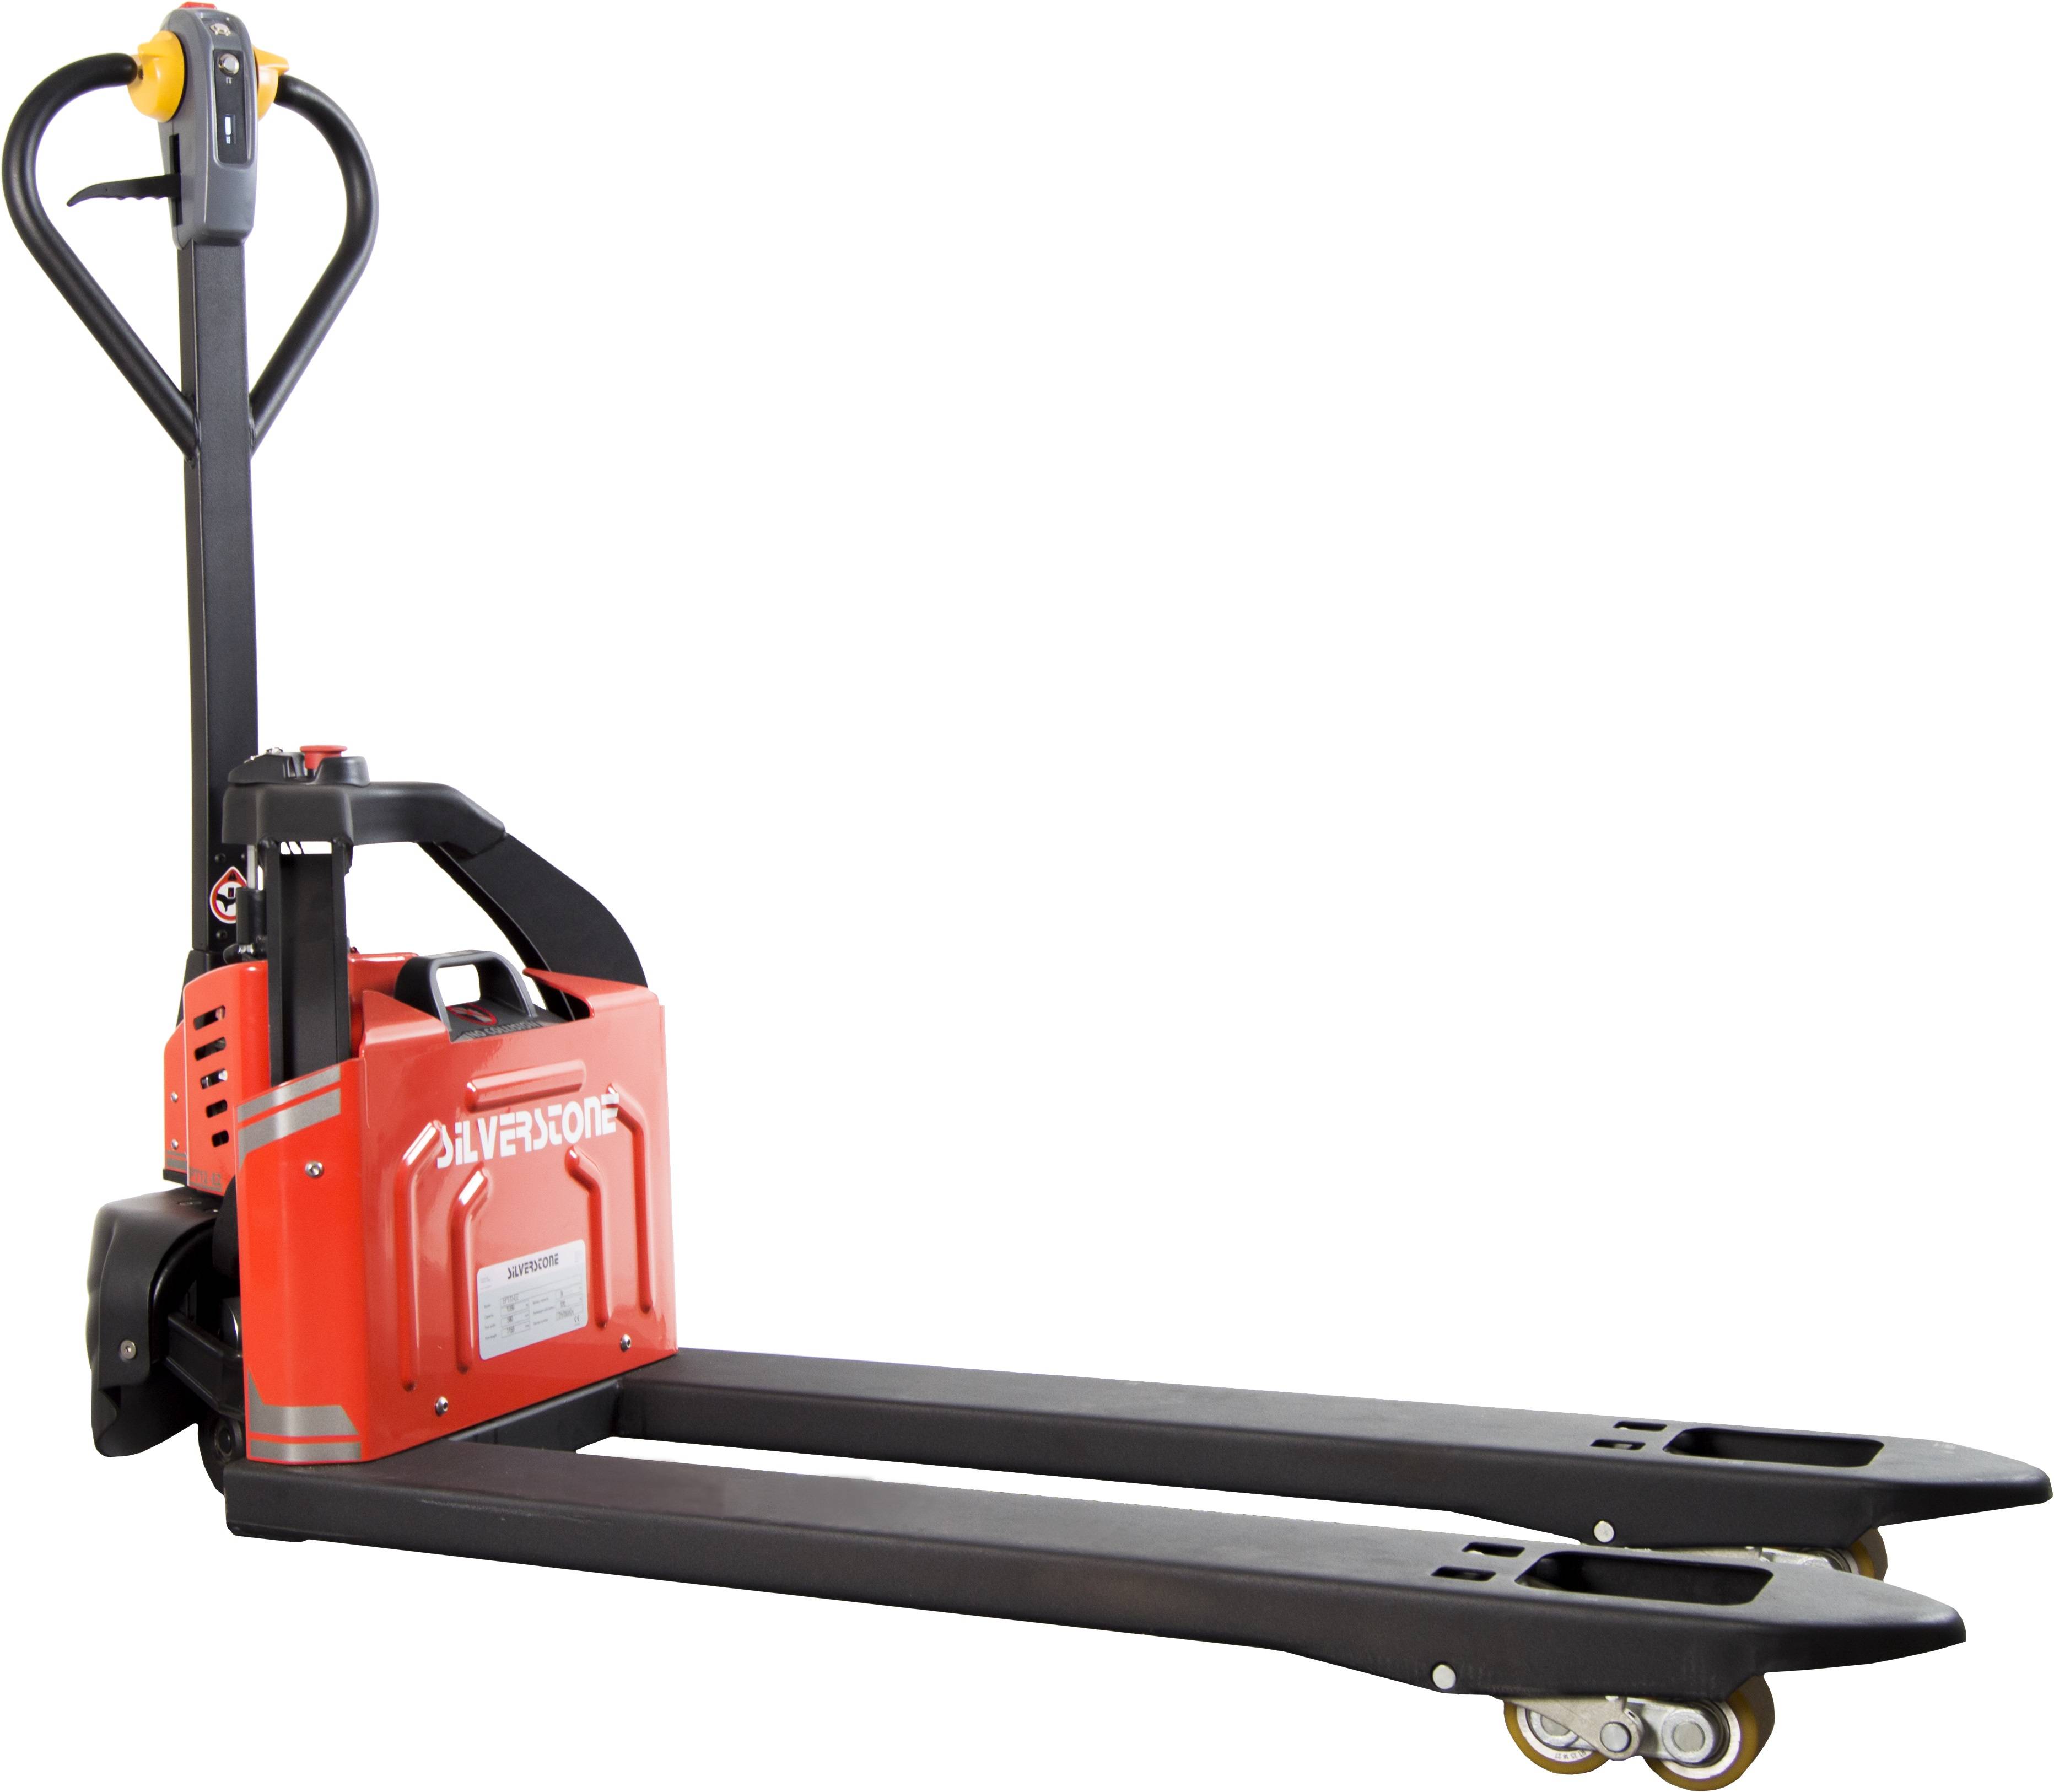 Charge your Powered Pallet Truck on the Go!